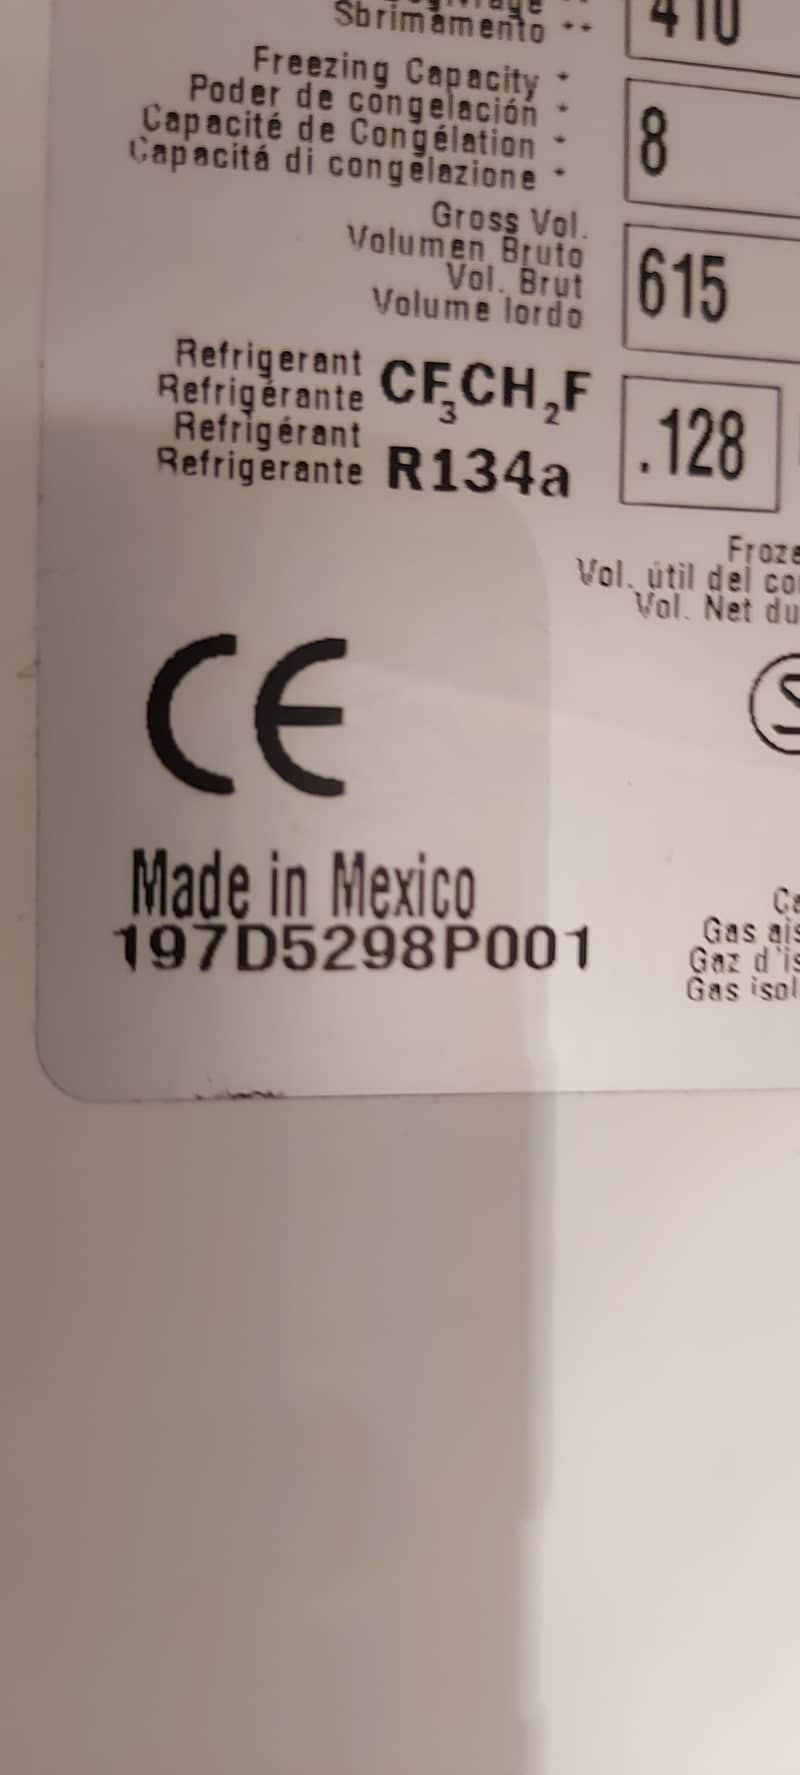 GE Refrigerator Made in Mexico Huge size 615 ltr capacity 22 cu ft 9